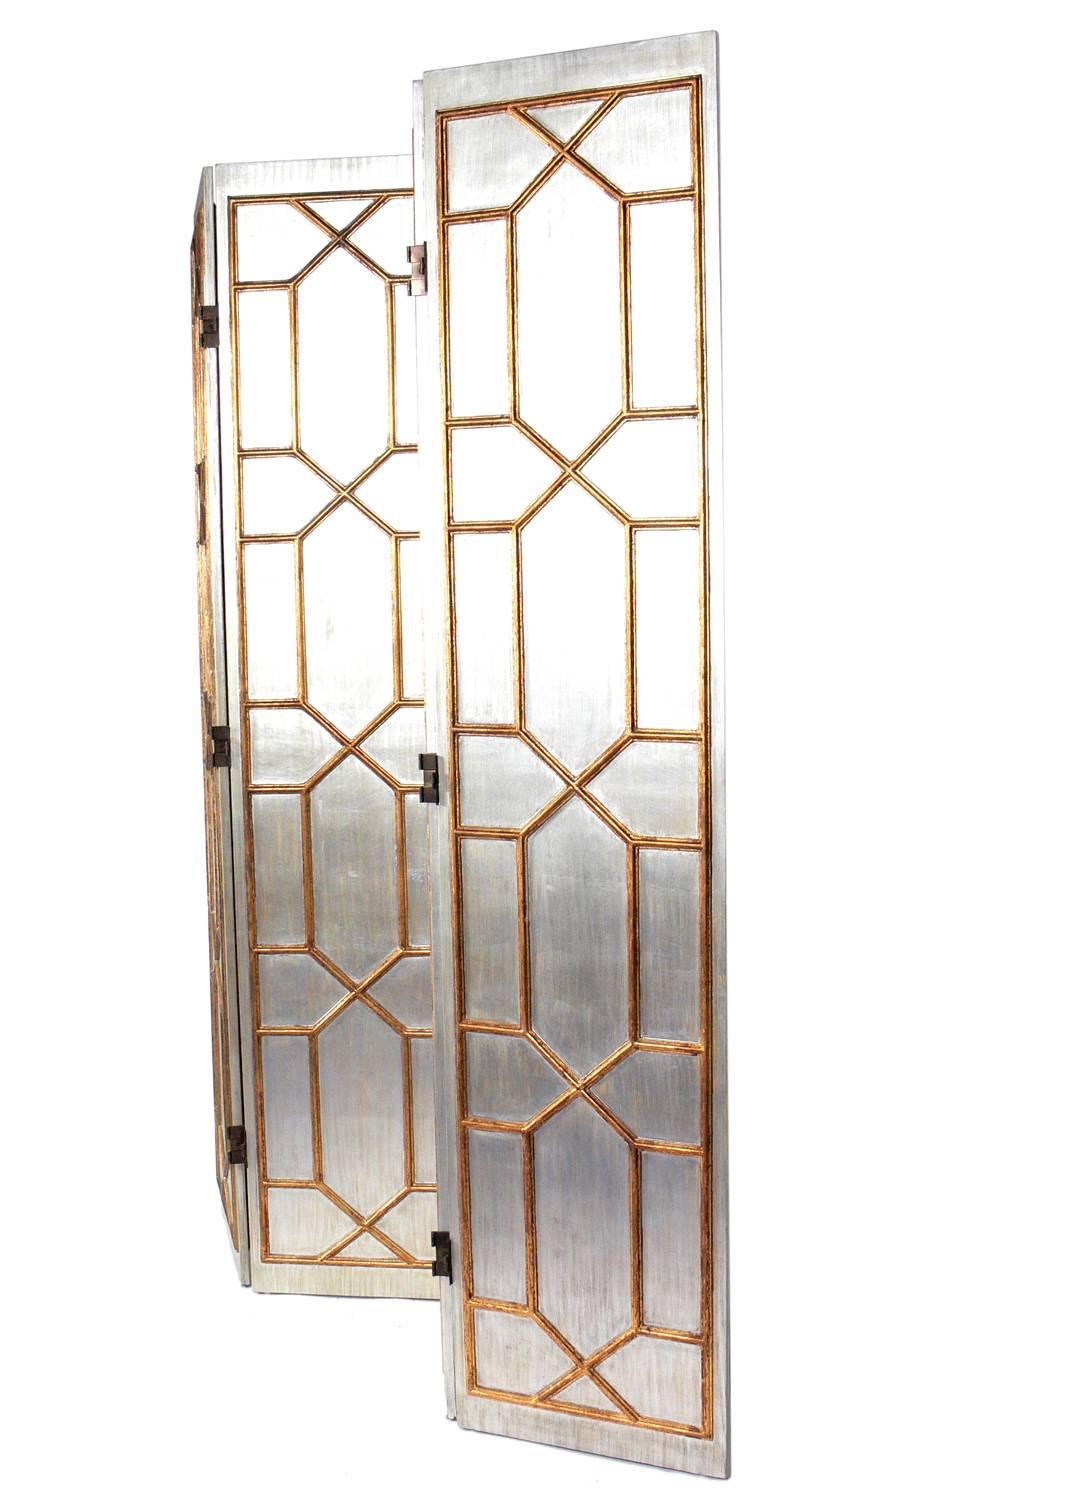 Glamorous silver and gold gilt folding screen or room divider, American, circa 1960s.